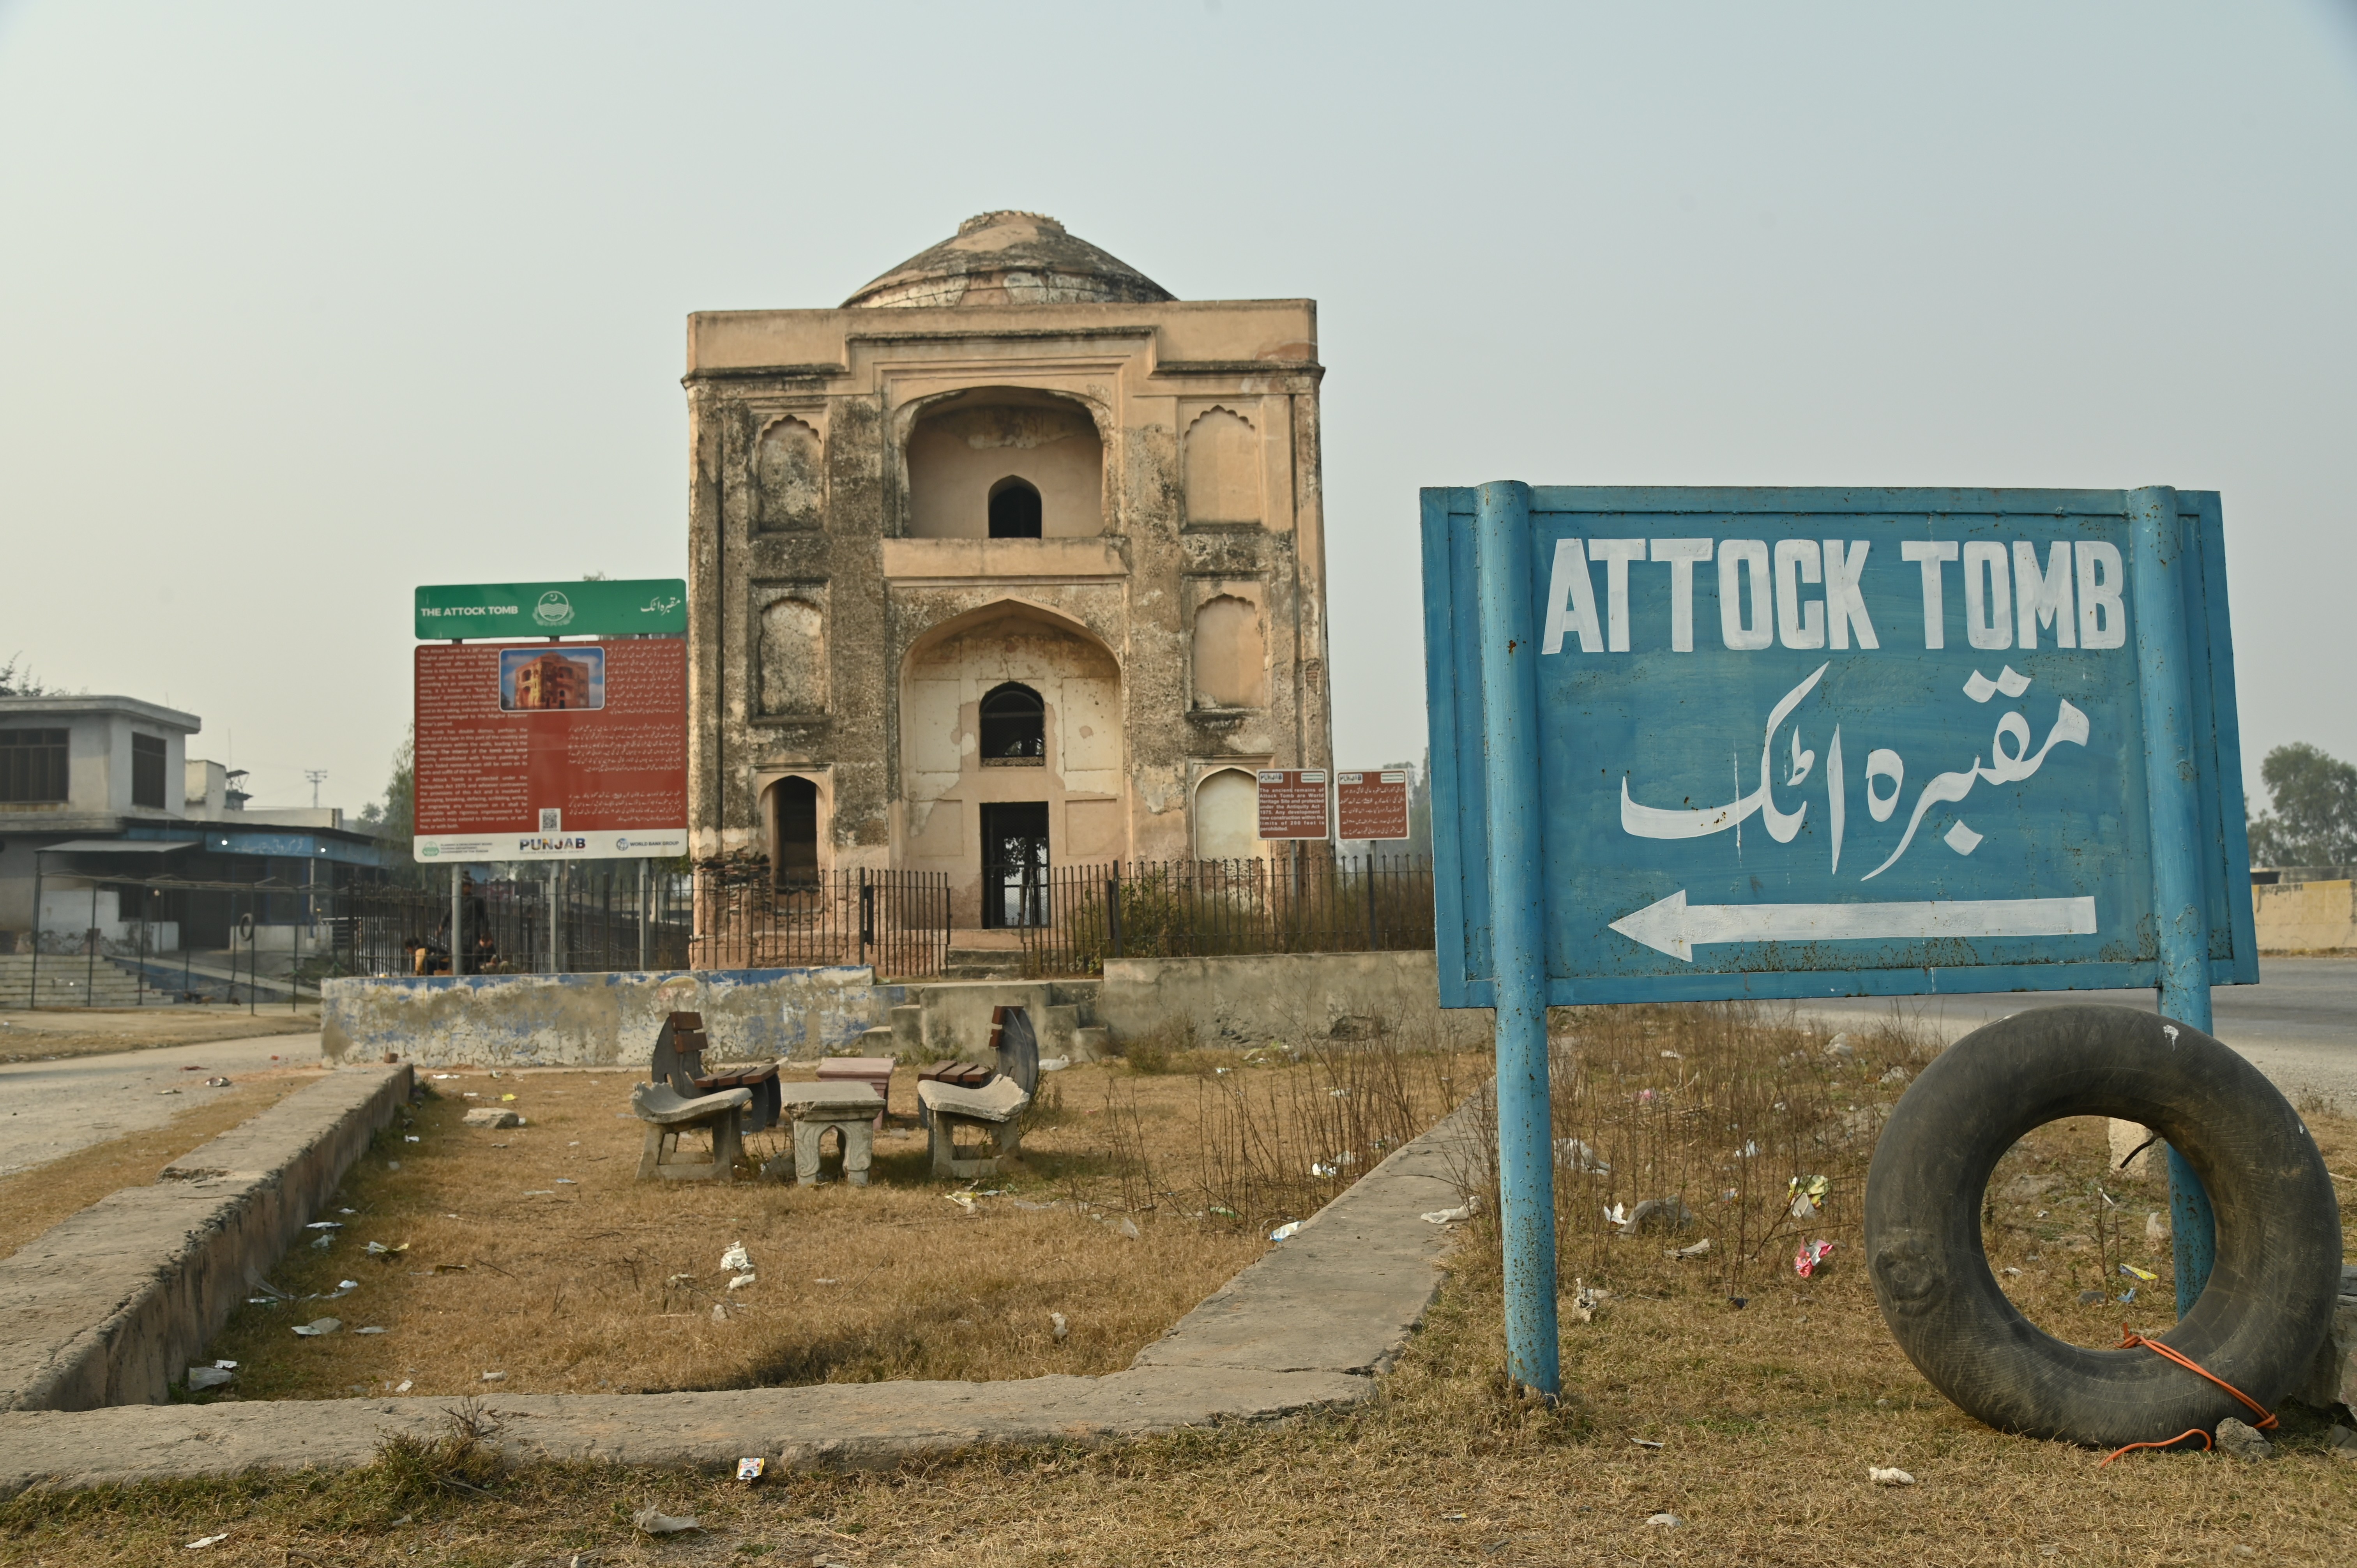 The Attock Tomb, A World Heritage Site protected under the Antiquities Act 1975 of Pakistan